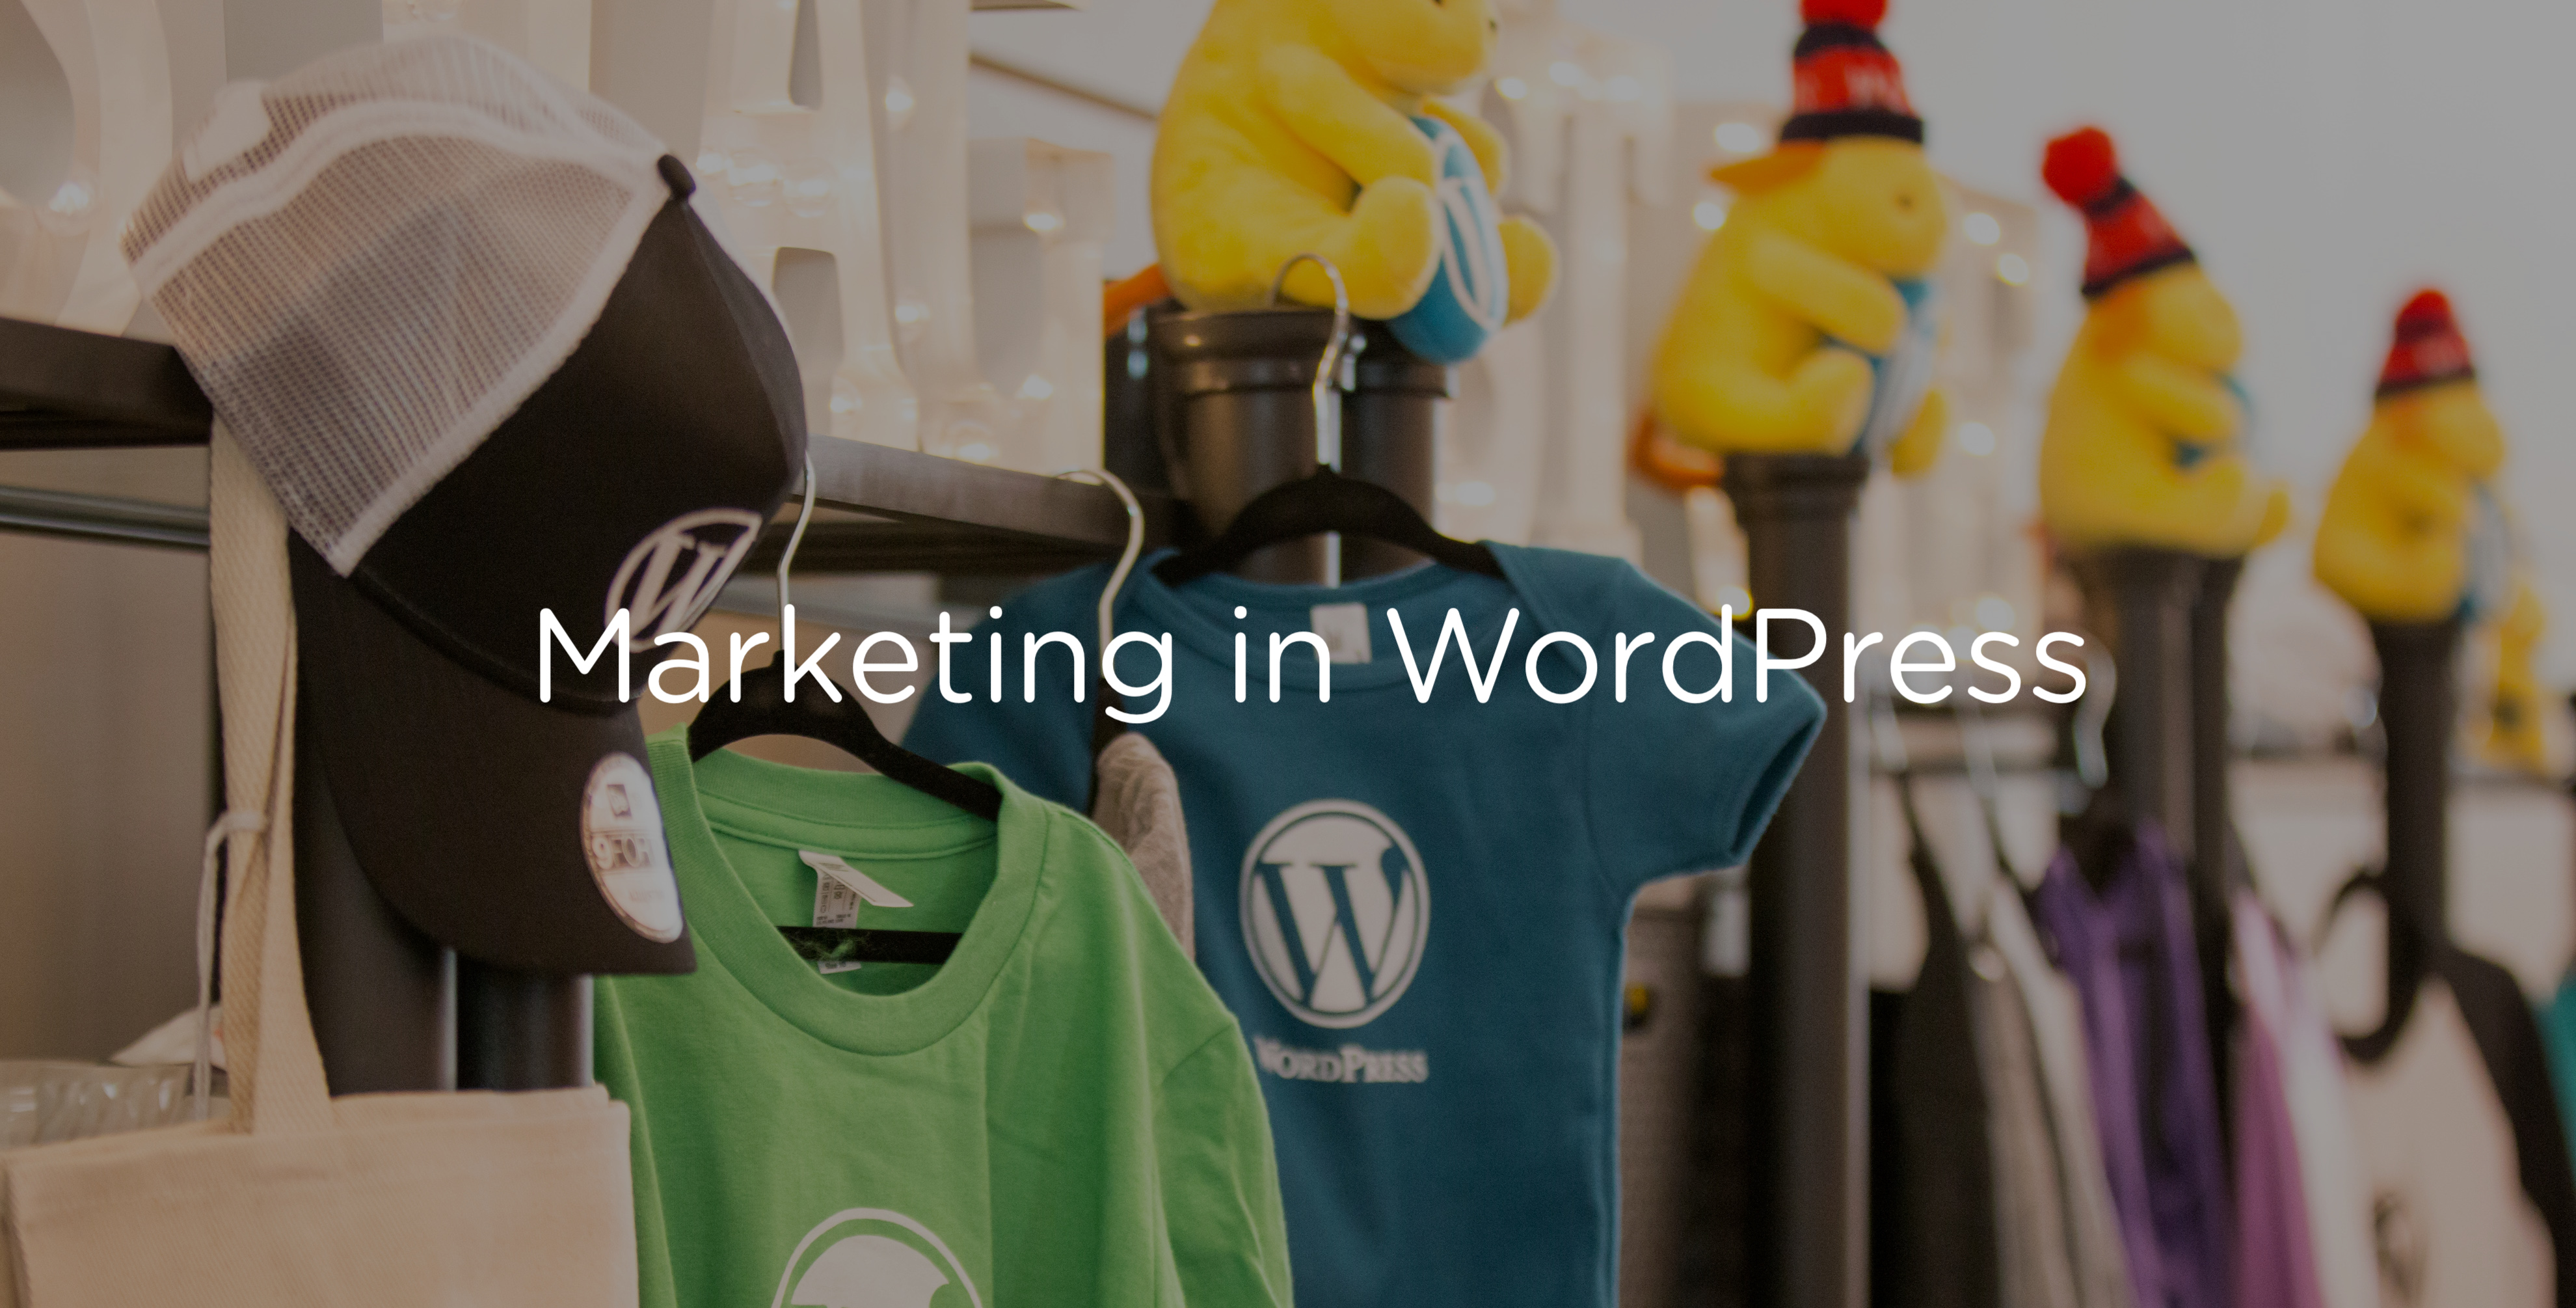 Marketing and positioning WordPress products — Draft podcast